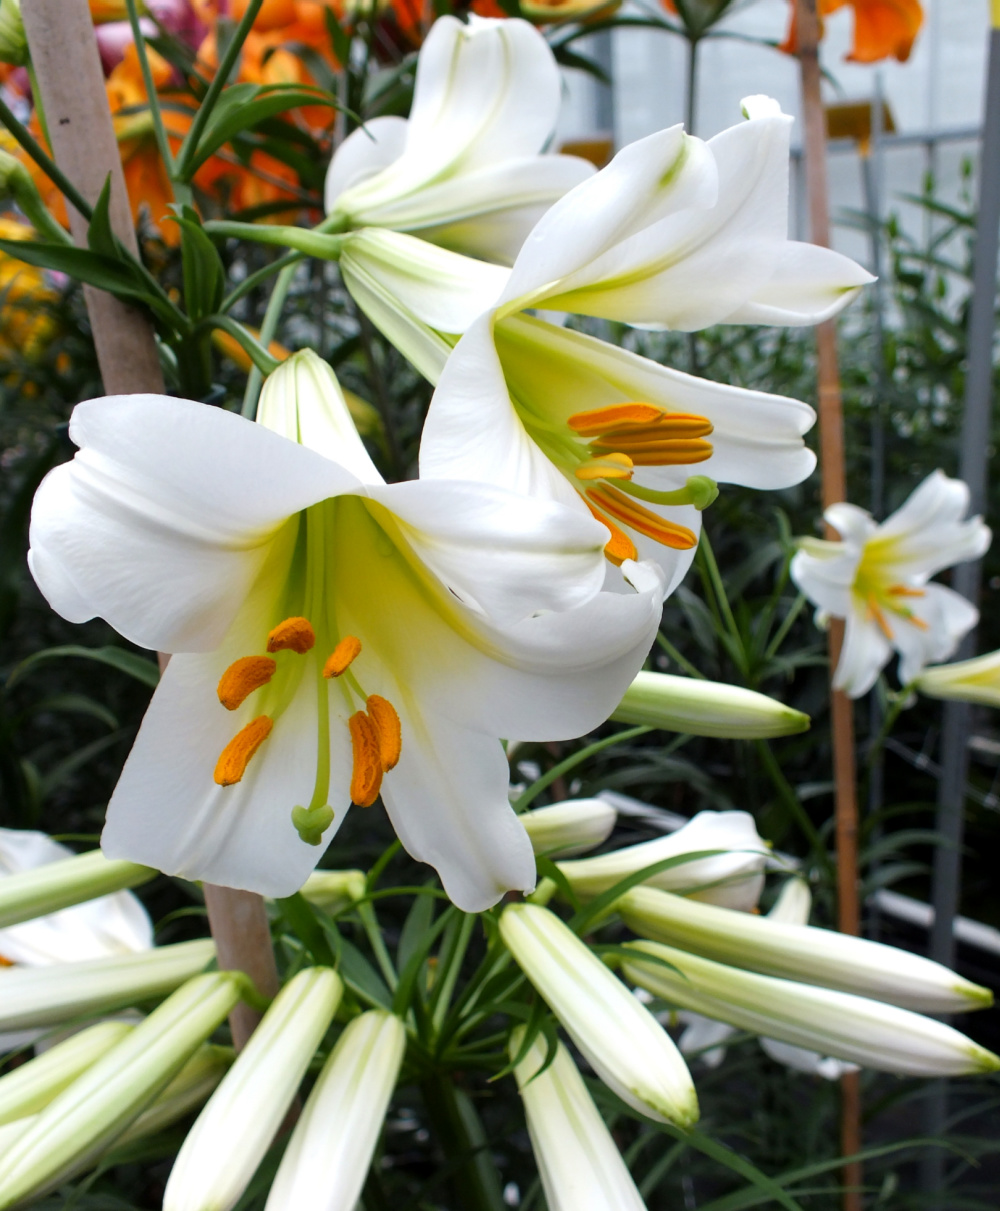 Chinese Trumpet Lilies